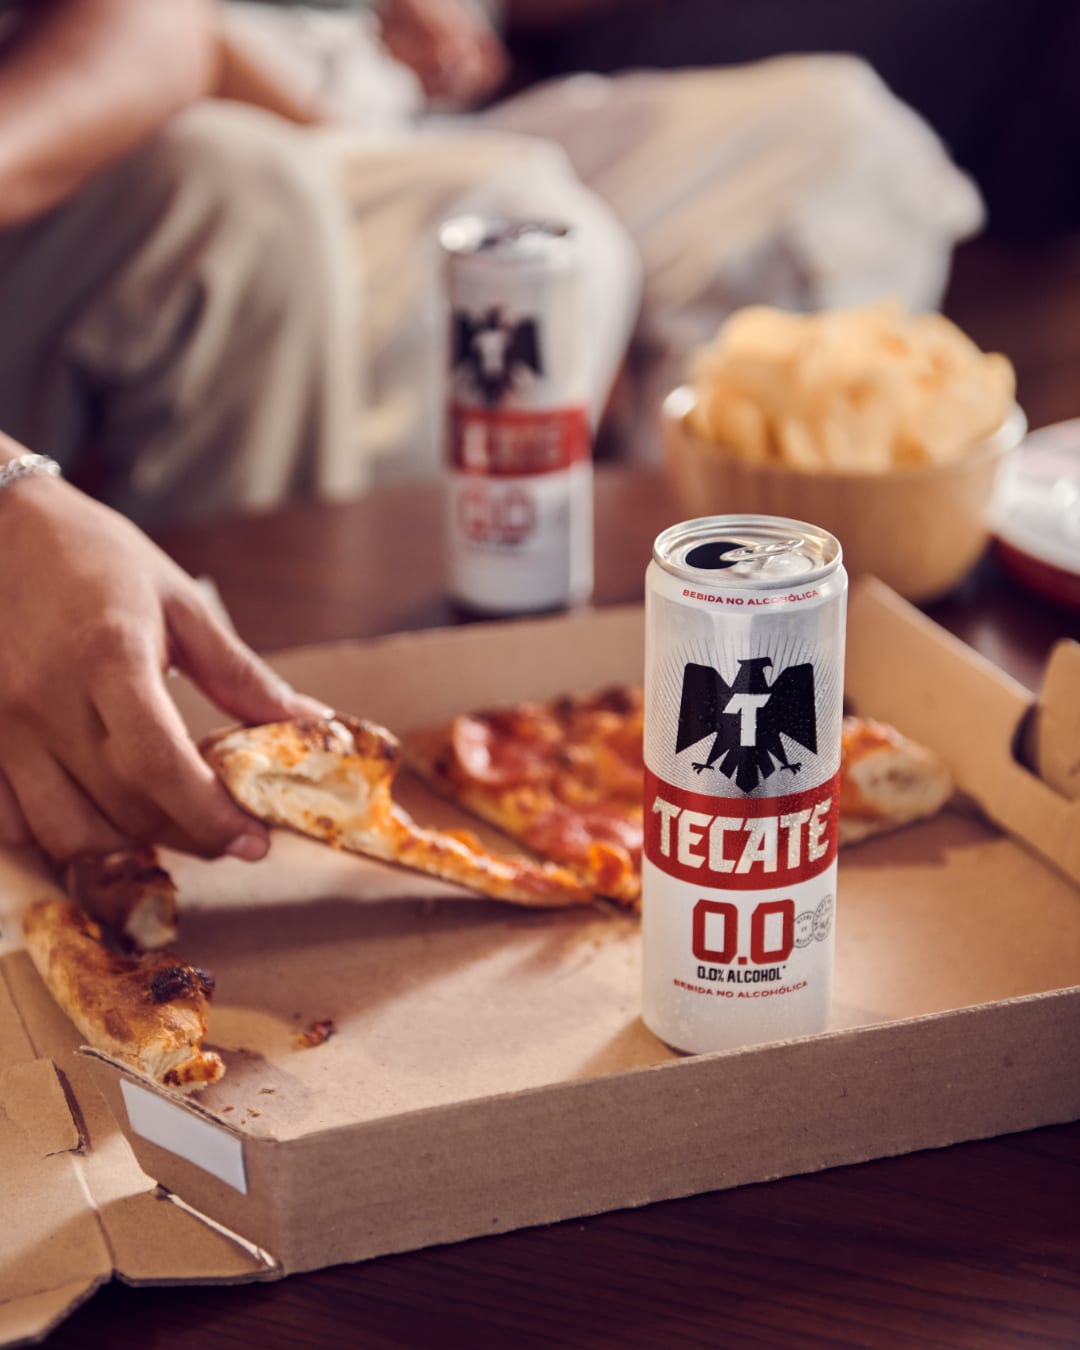 Tecate 00 beer can and pizza slices